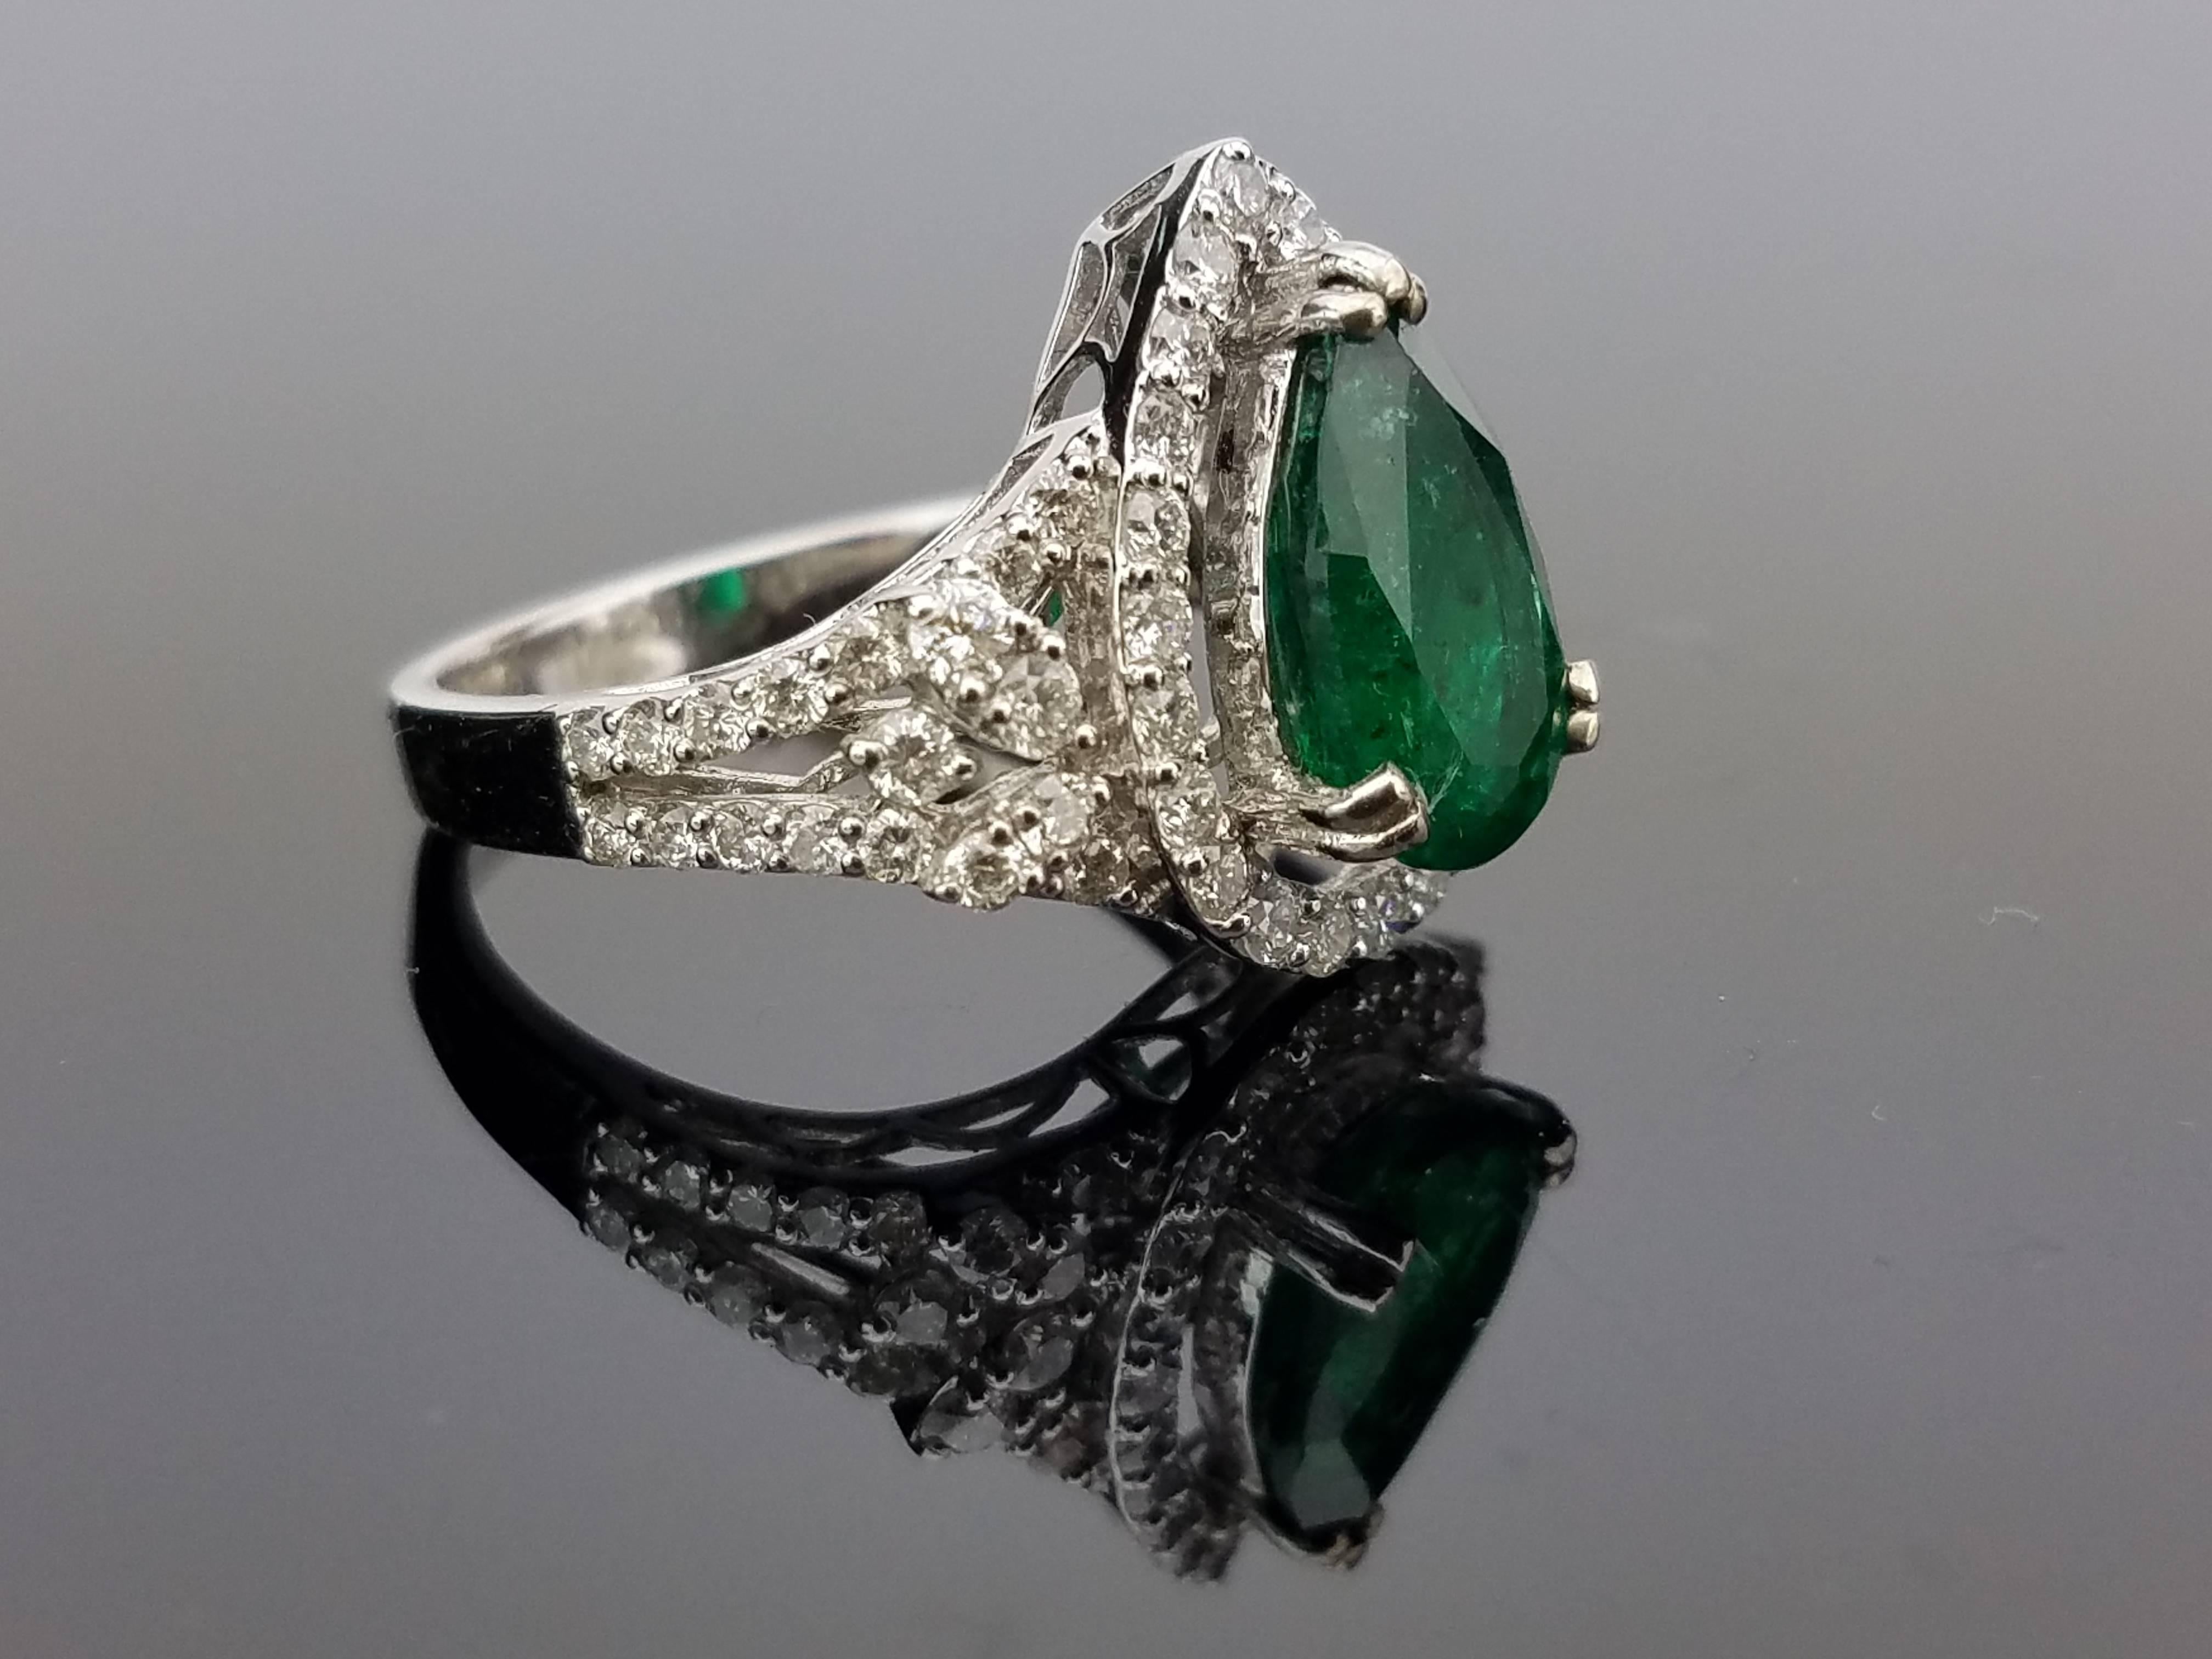 Pear shape Zambian Emerald Ring surrounded with Brilliant Cut Diamond Cluster on 18K White Gold hoop

Center Stone Details: 
Stone: Zambian Emerald
Cut: Pear
Weight: 2.4 carat

Diamond Details: 
Cut: Brilliant (round)
Total Carat Weight: 1.13